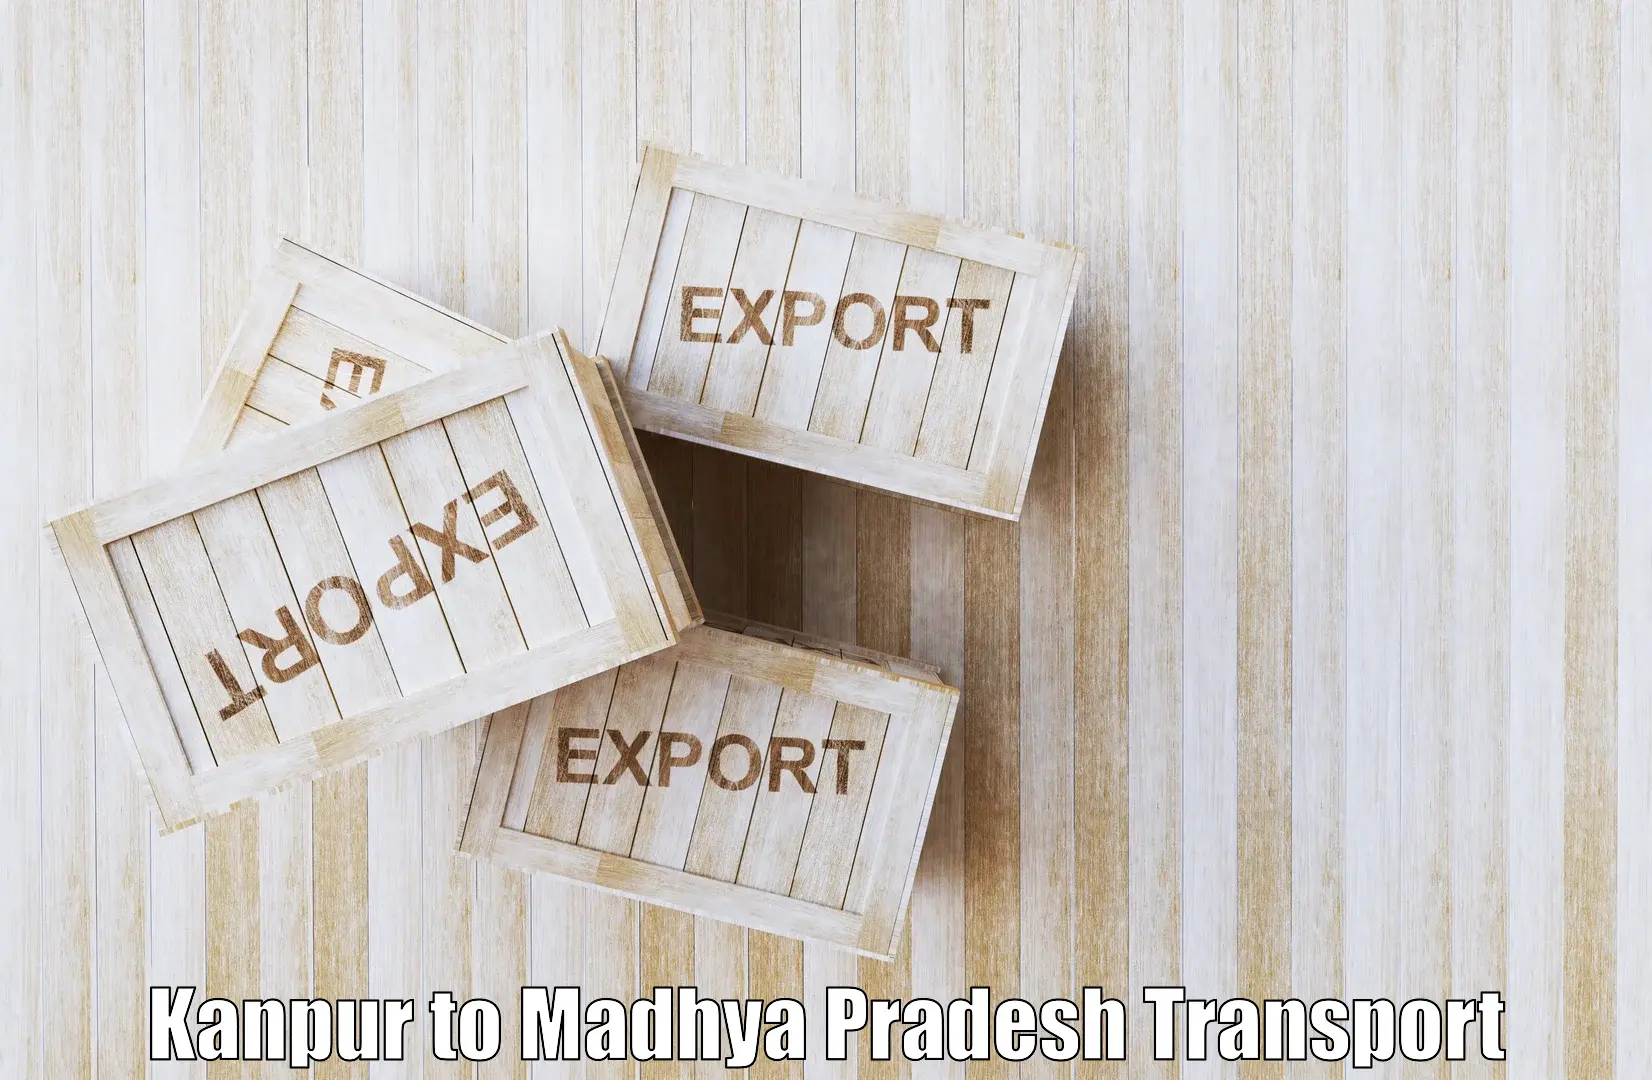 Container transport service Kanpur to Gosalpur